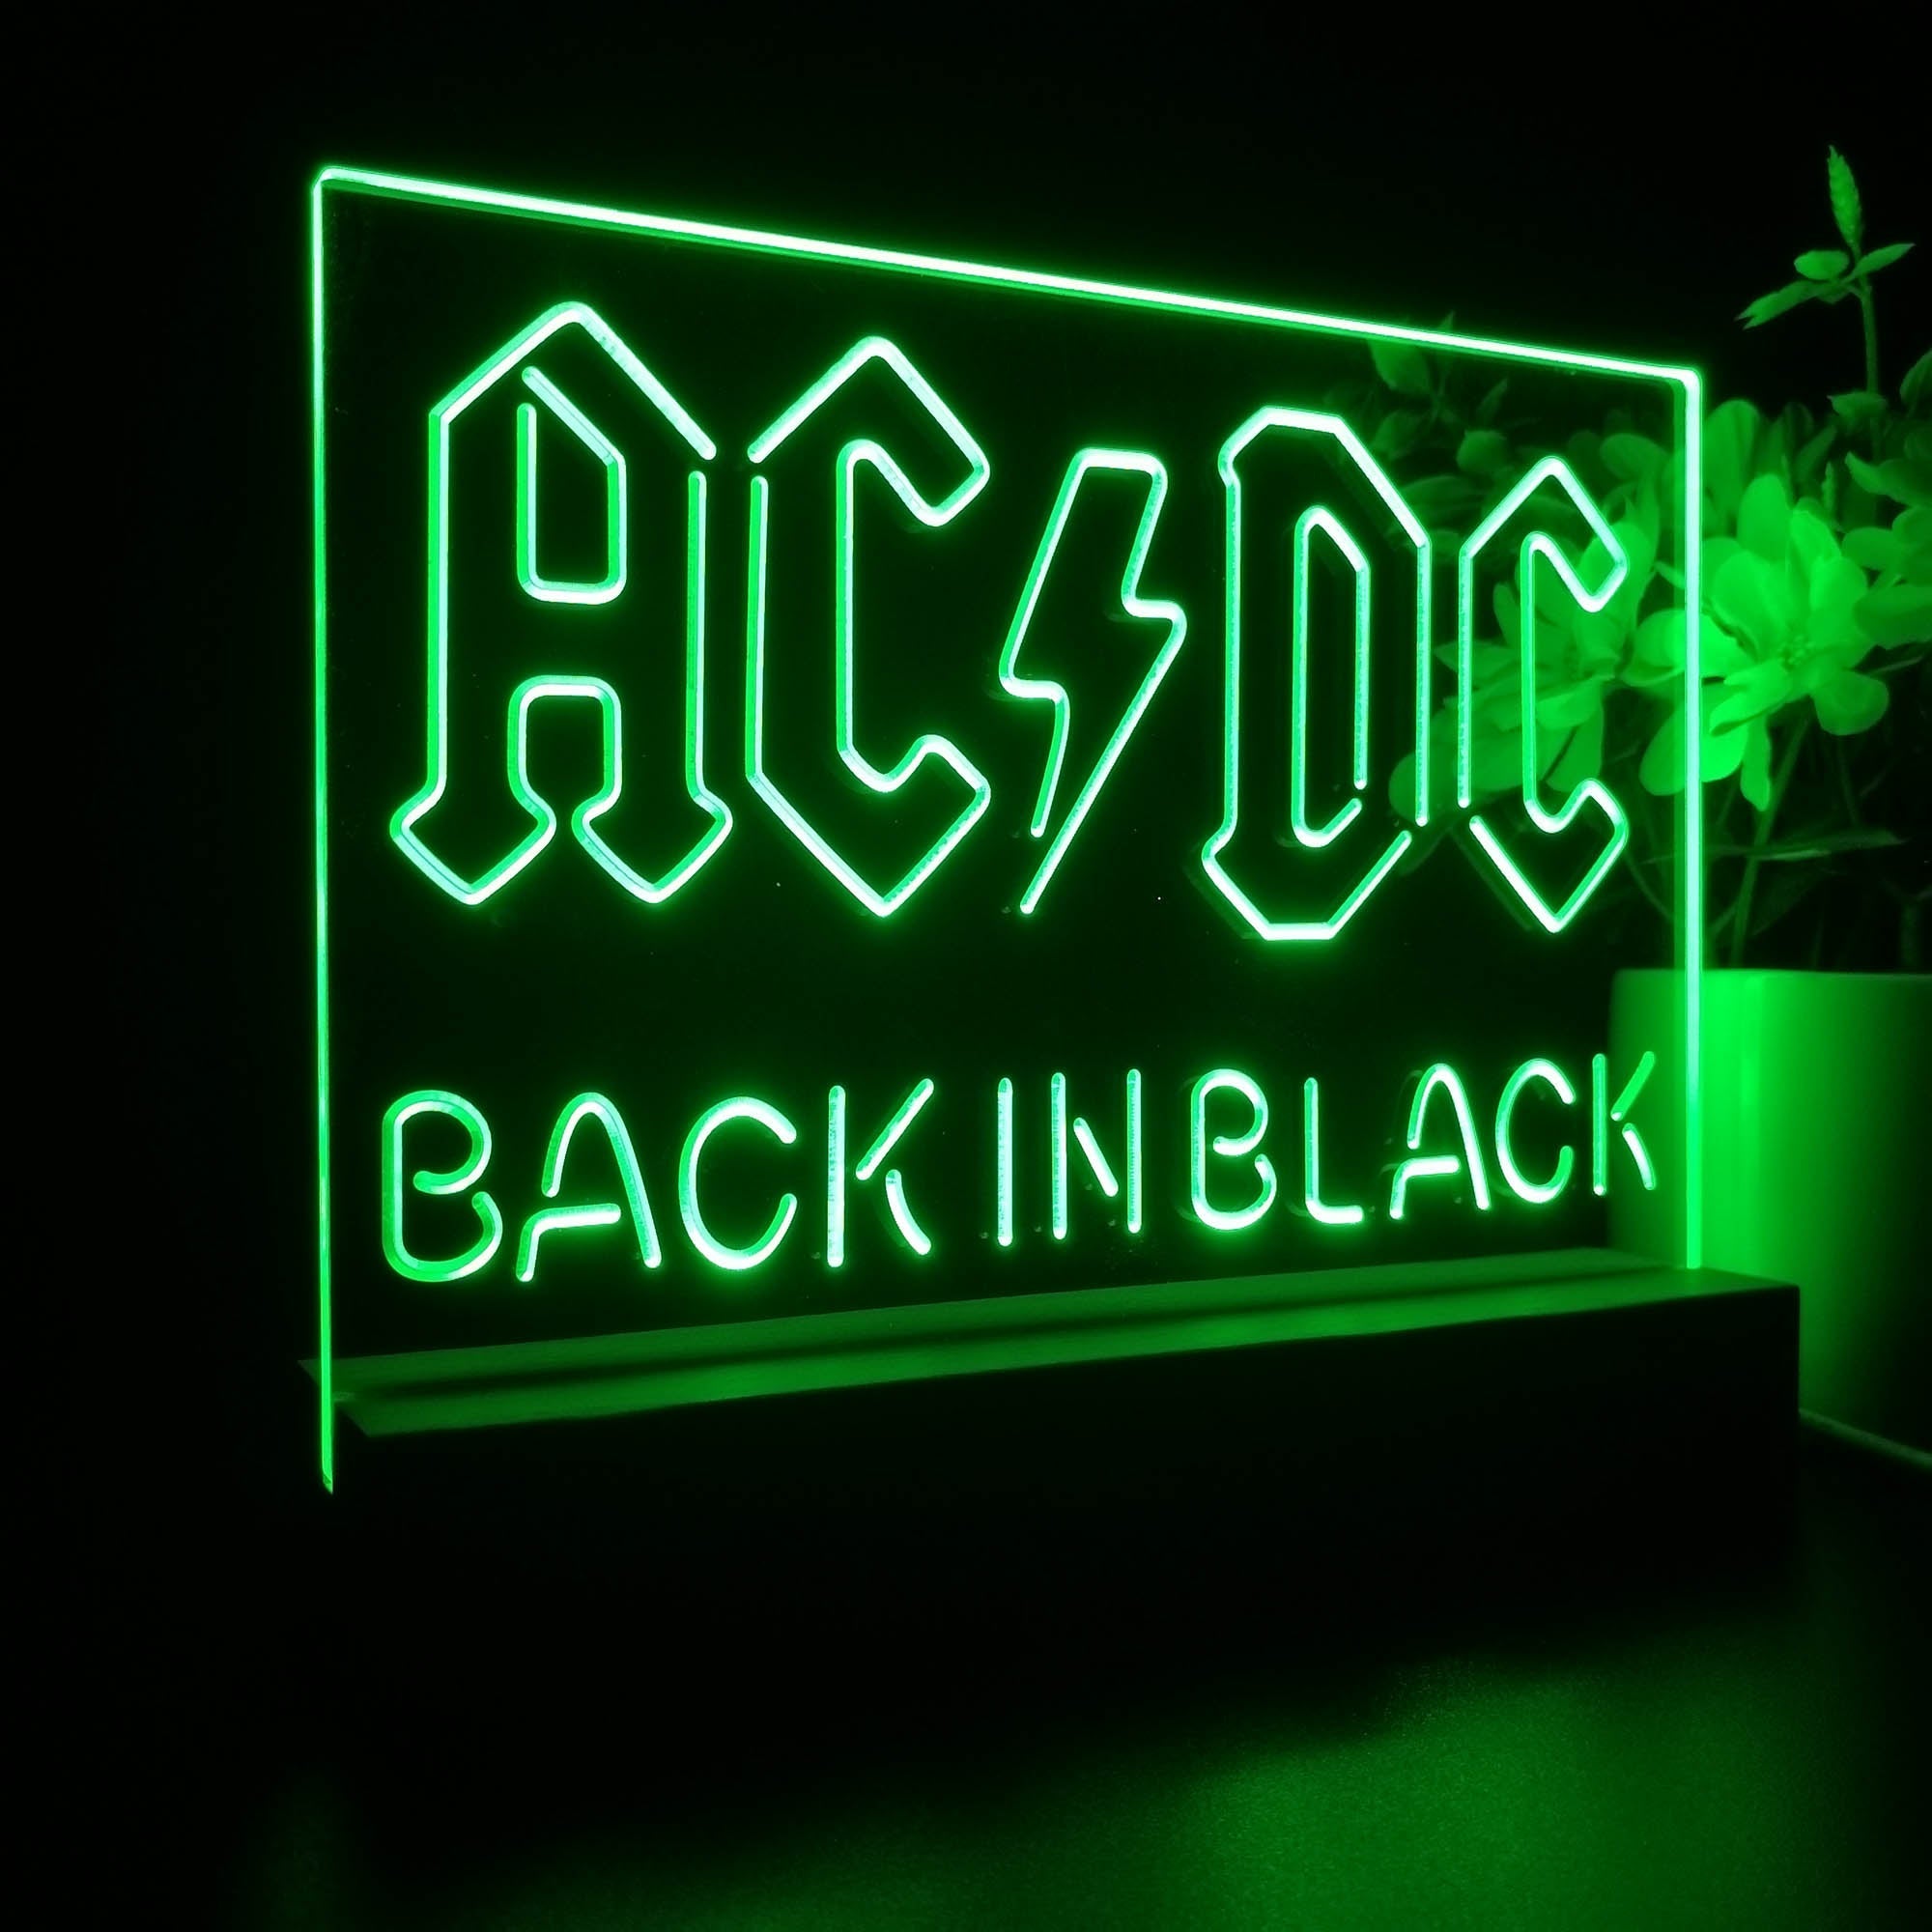 ACDC Back In Black Music Band 3D Illusion Night Light Desk Lamp